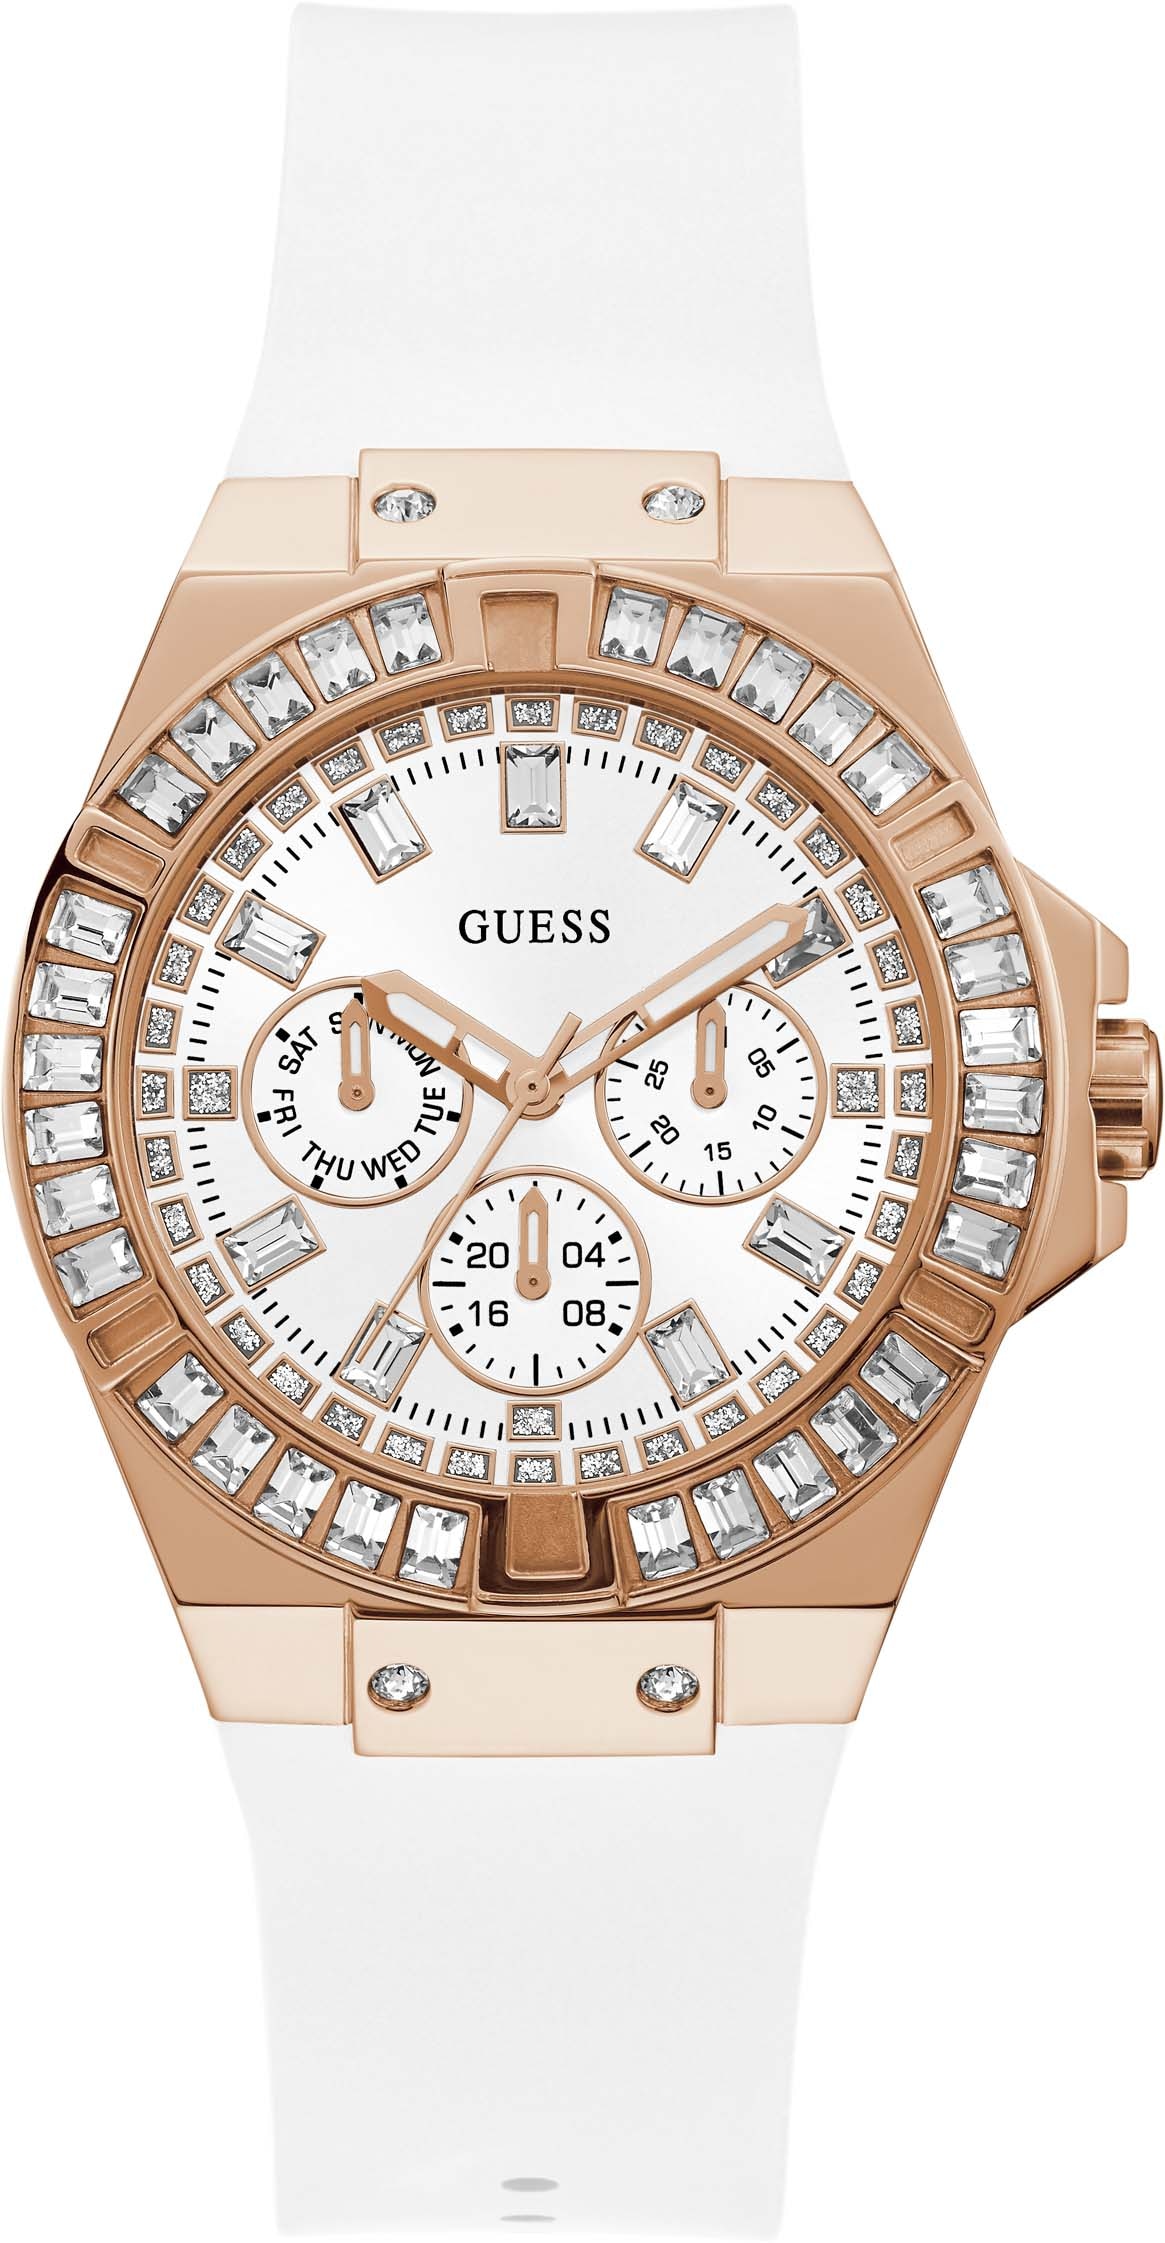 OTTOversand Guess Multifunktionsuhr »GW0118L4« bei